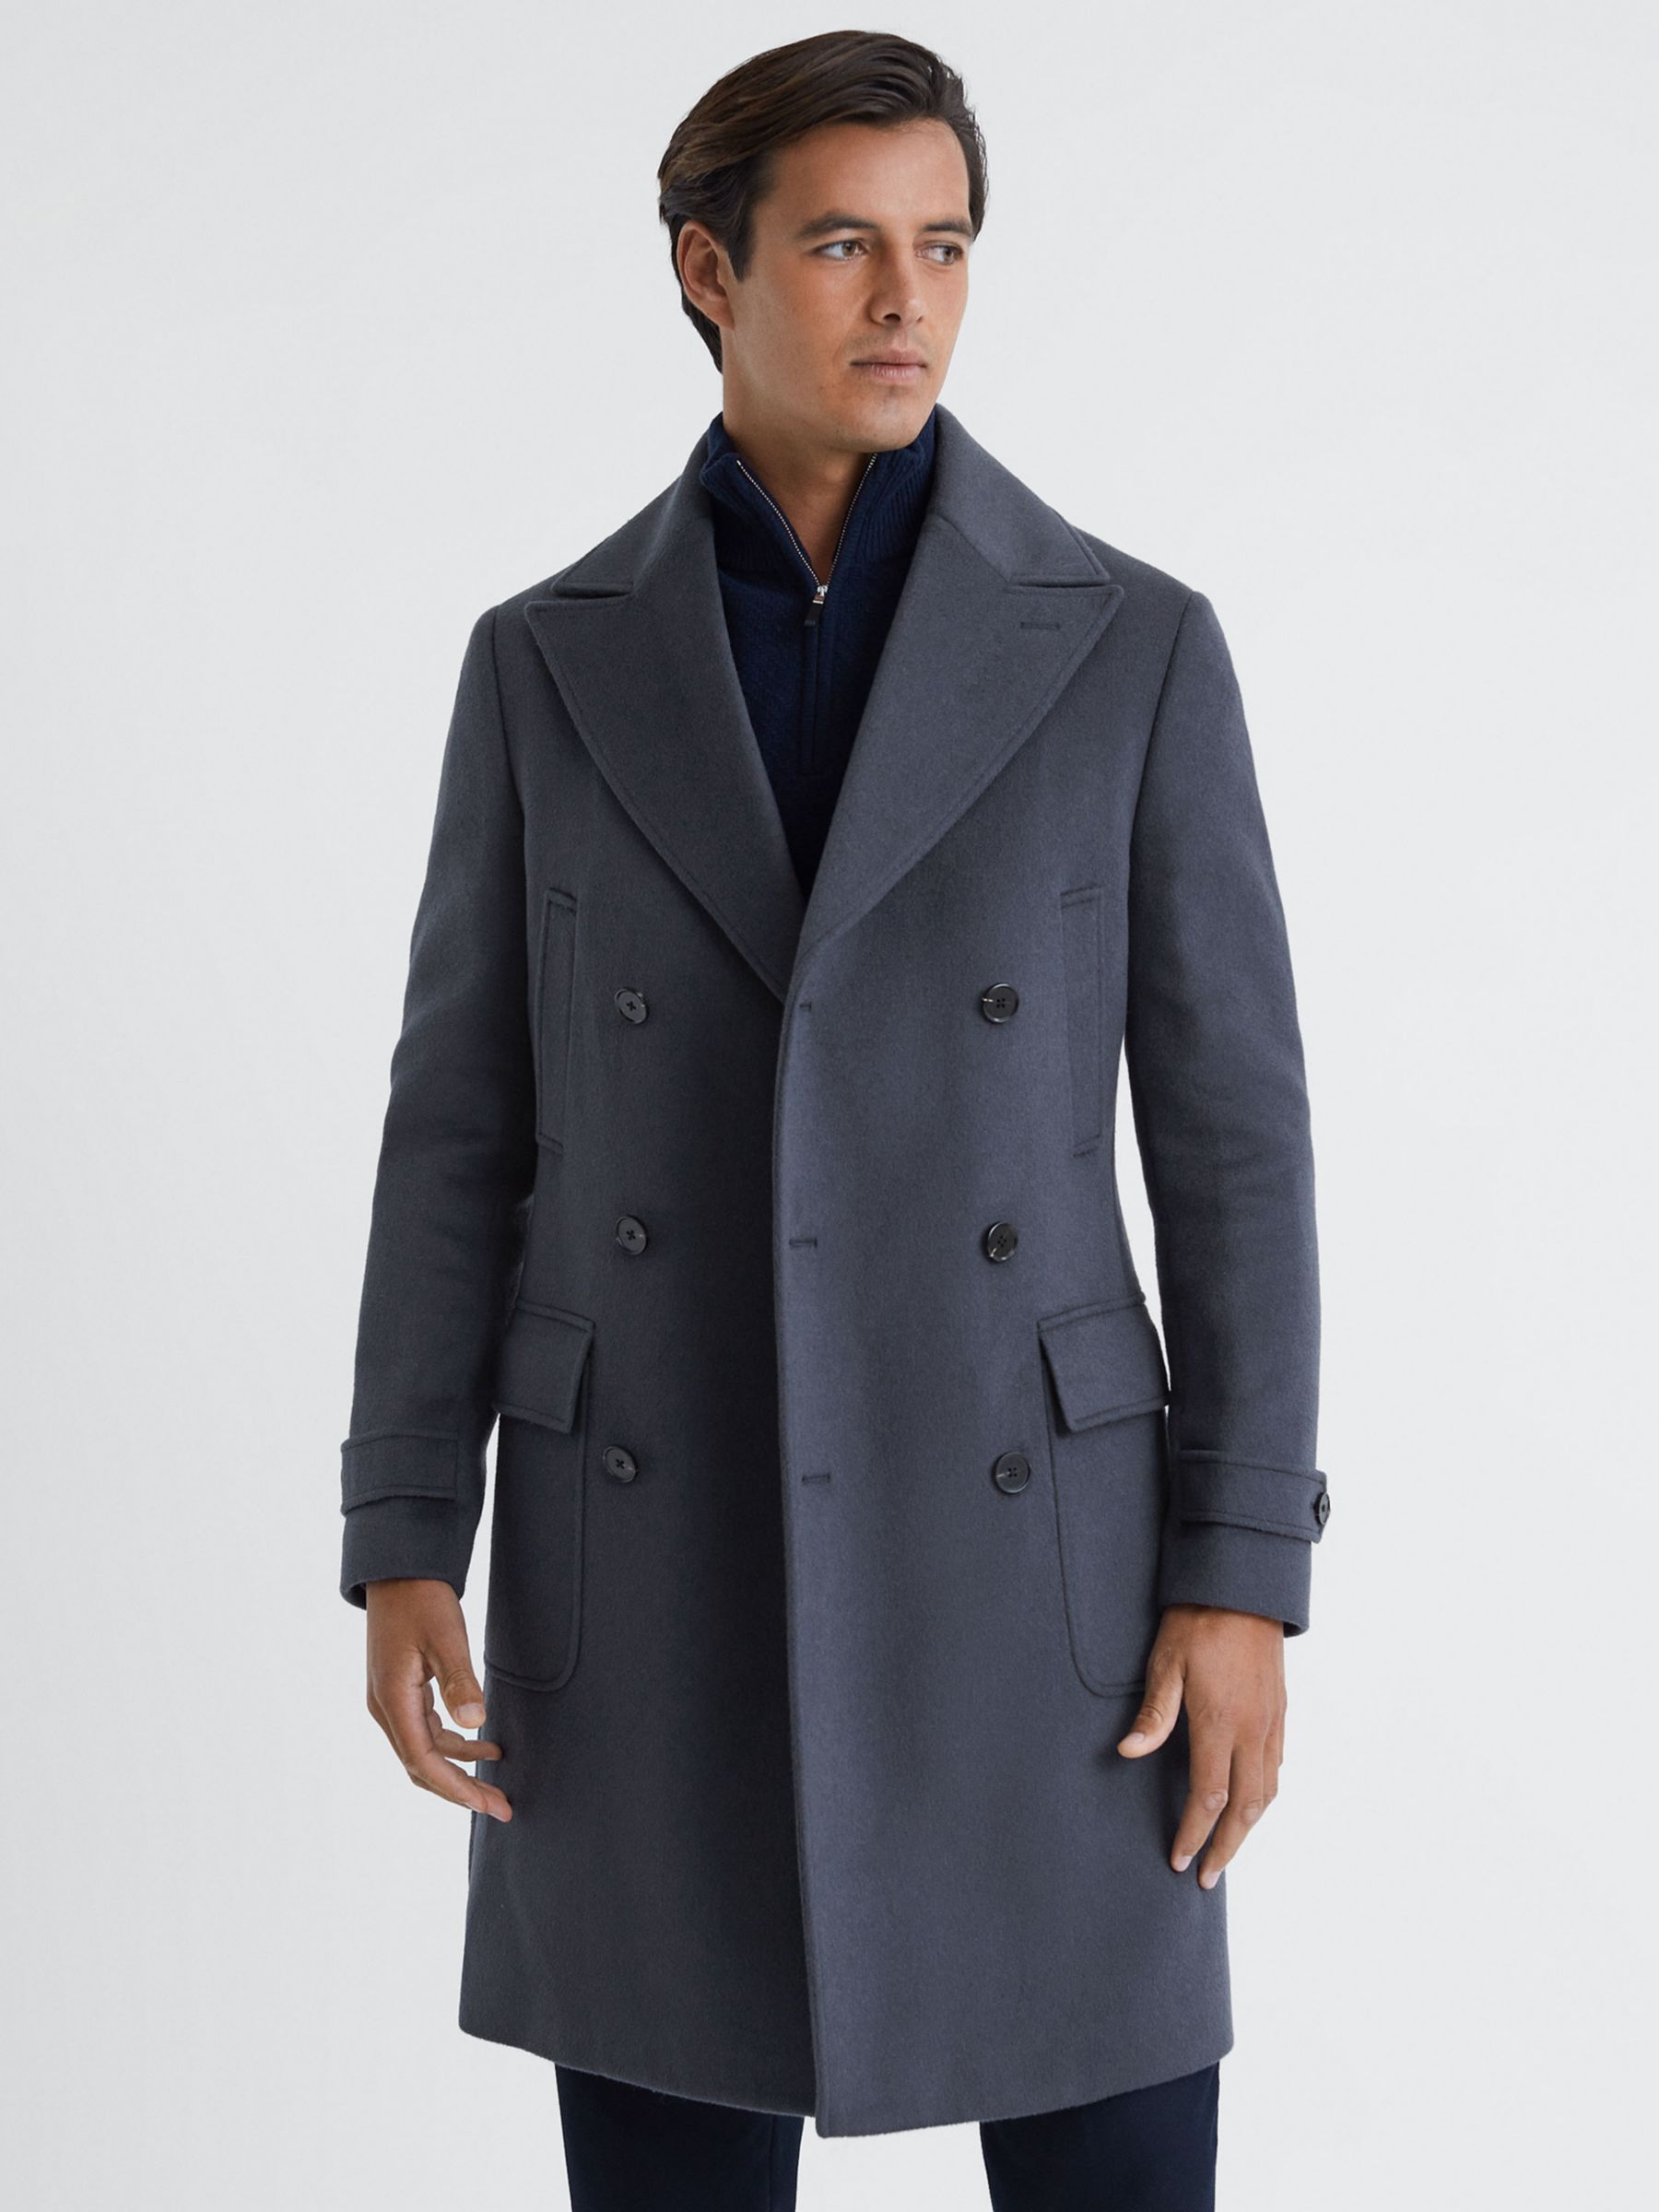 Reiss Crowd Wool Blend Military Overcoat, Airforce Blue